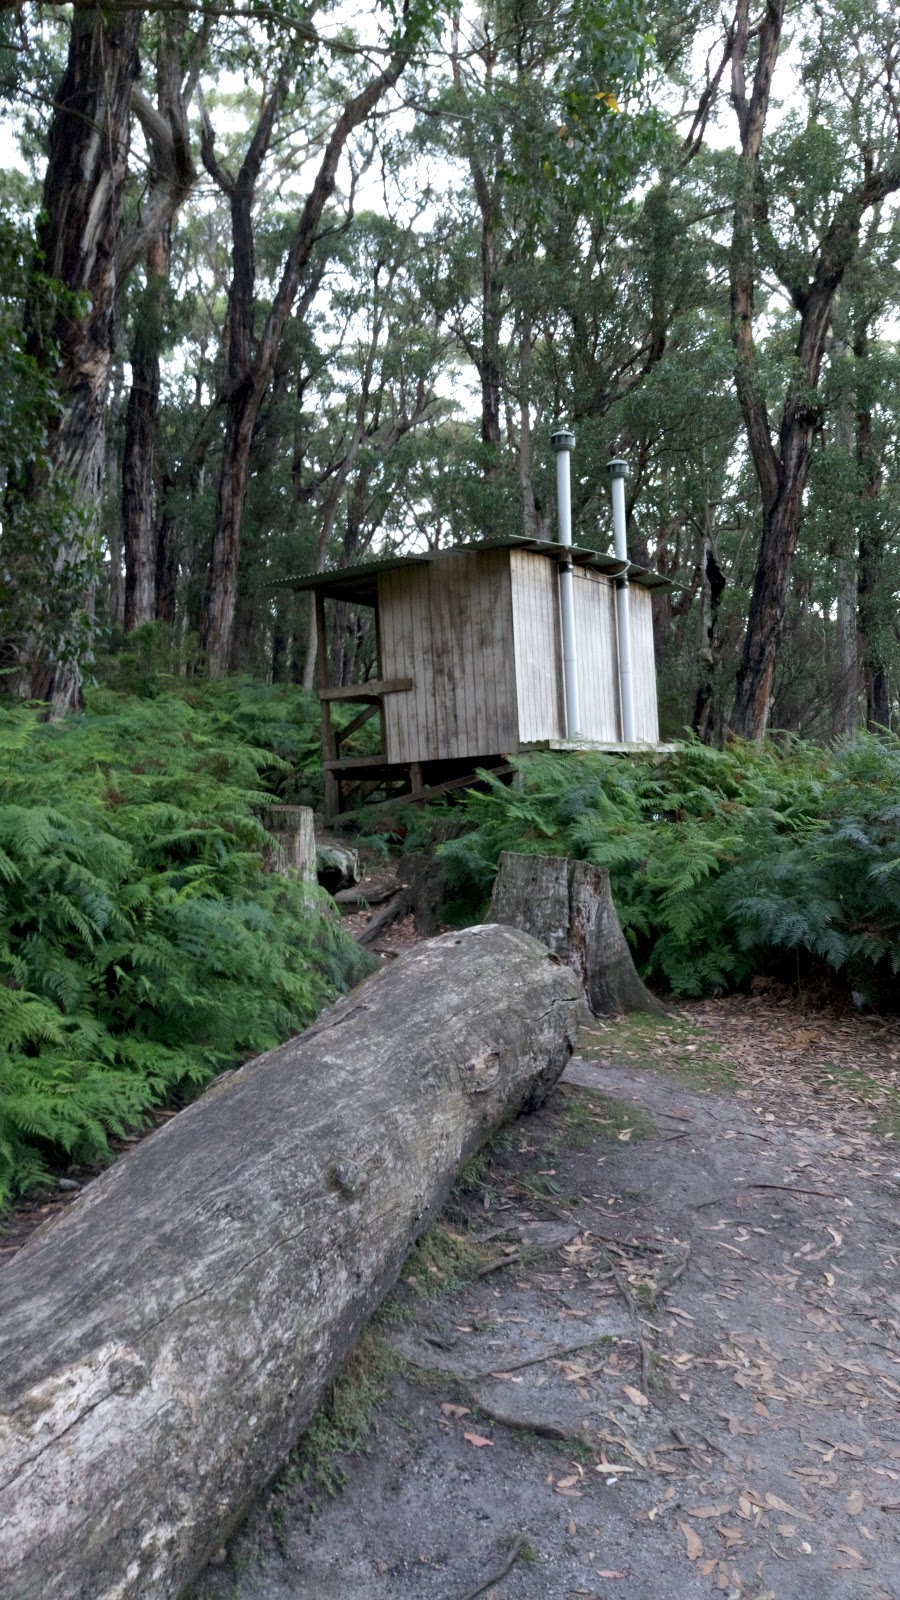 Sealers Cove Campground | National Park, Wilsons Promontory VIC 3960, Australia | Phone: 13 19 63